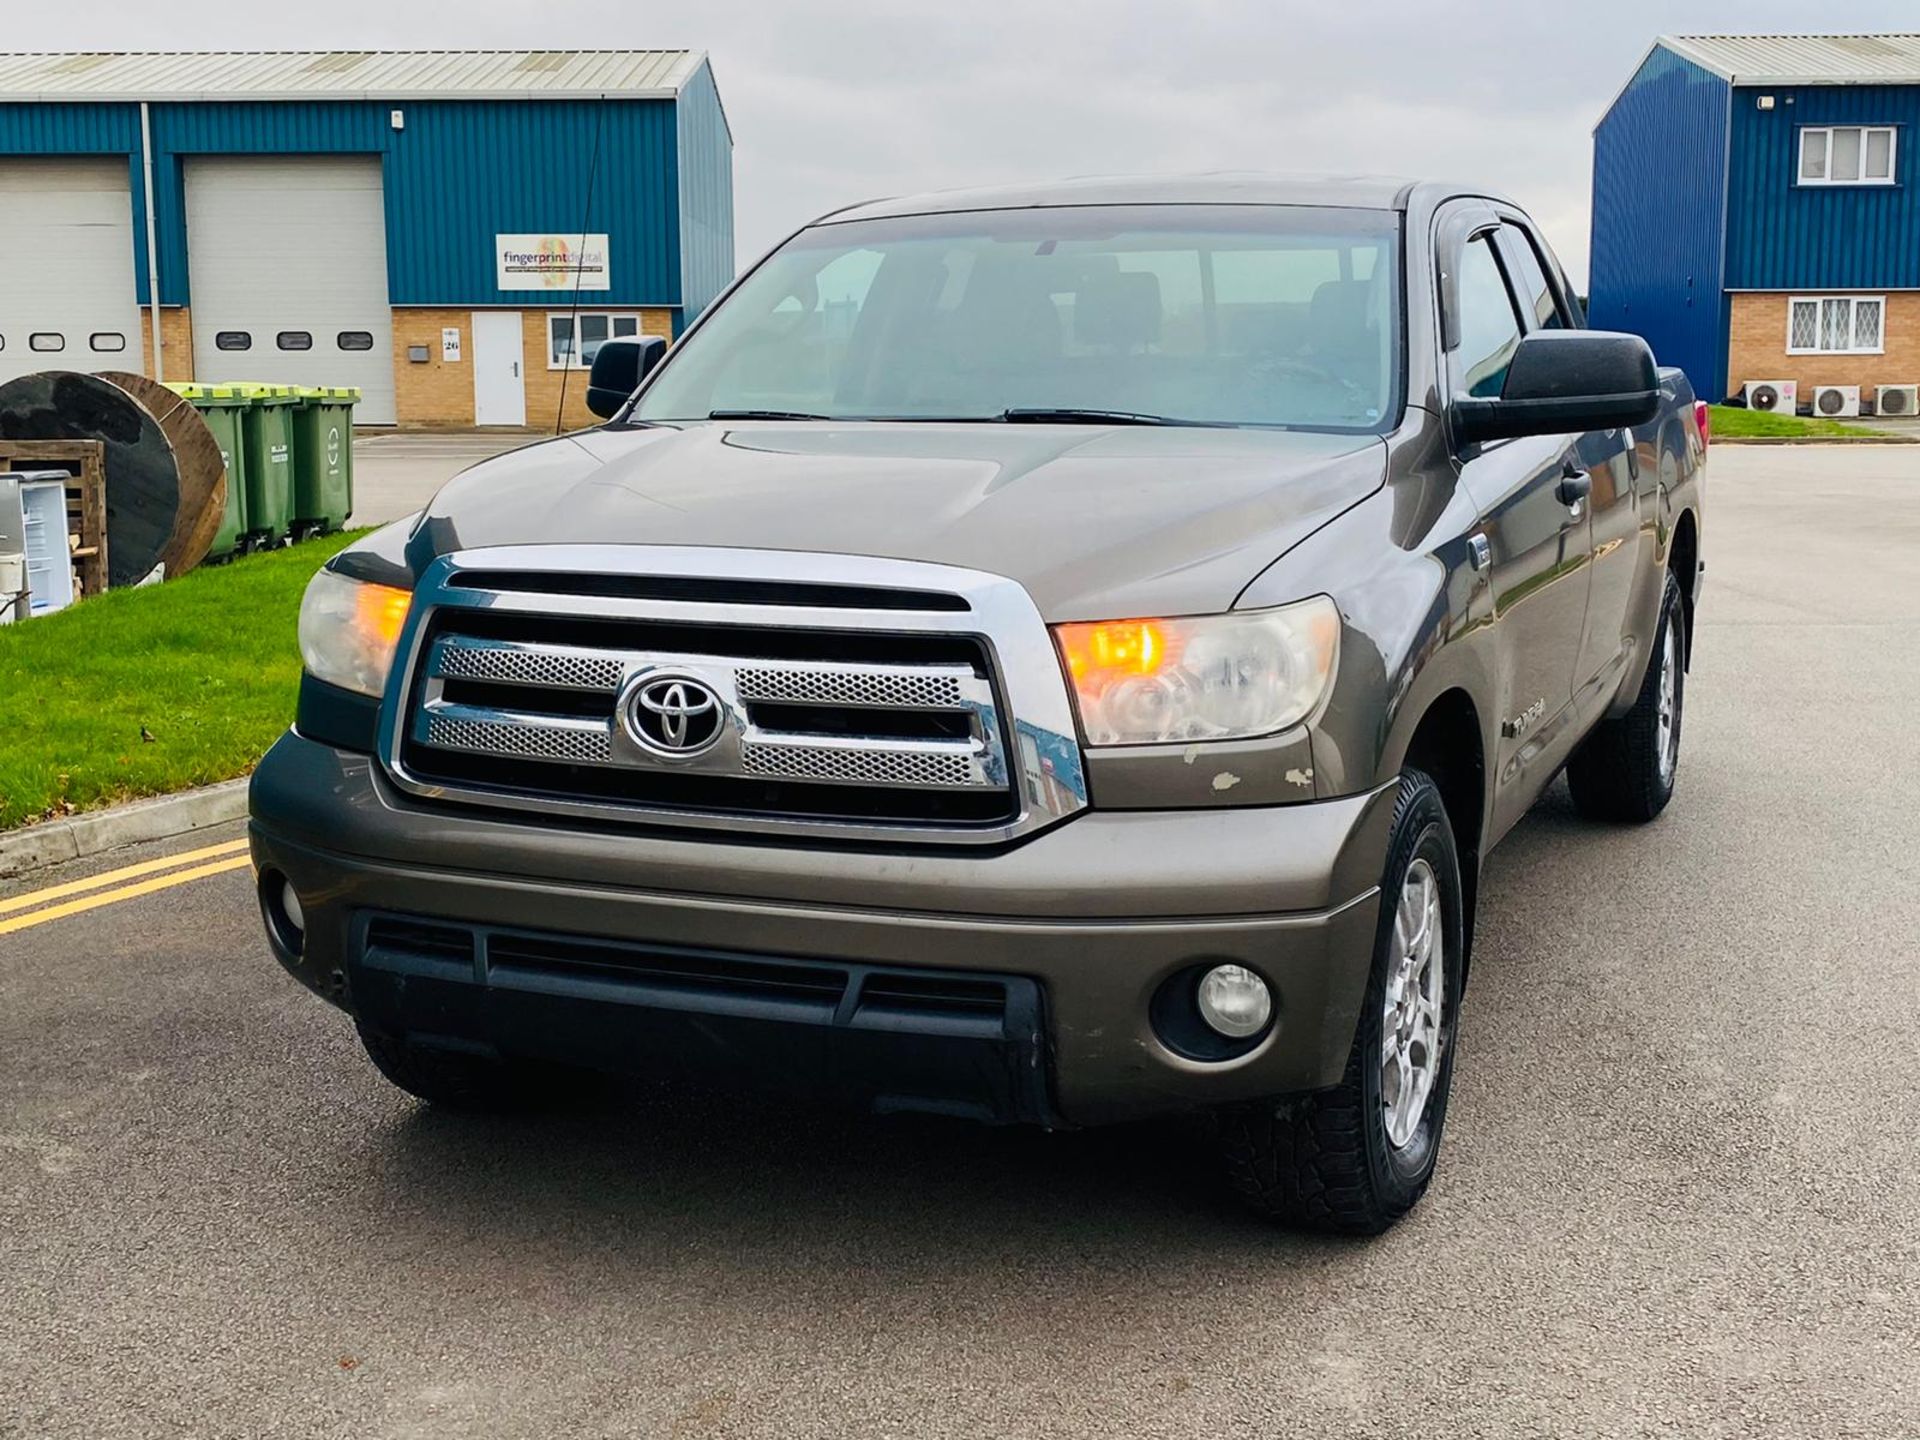 (RESERVE MET) TOYOTA TUNDRA 4.6 V8 SR5 SE DOUBLE-CAB - 2010 YEAR - AIR CON -FRESH IMPORT - - Image 11 of 24